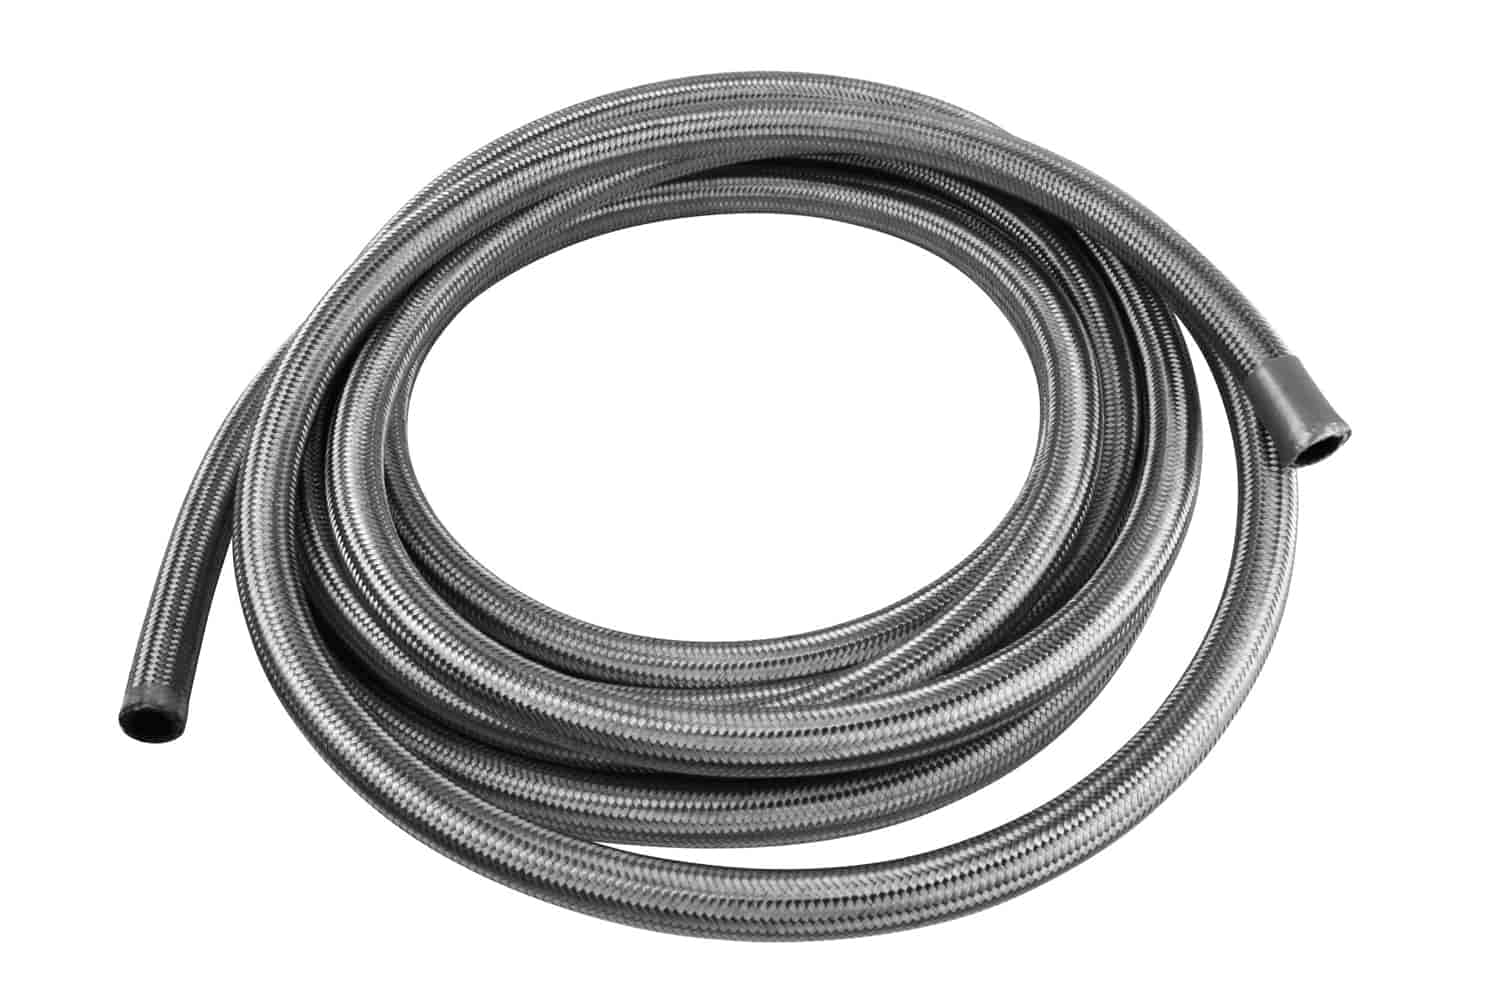 Braided Stainless Steel Fuel Hose -10AN x 20 ft